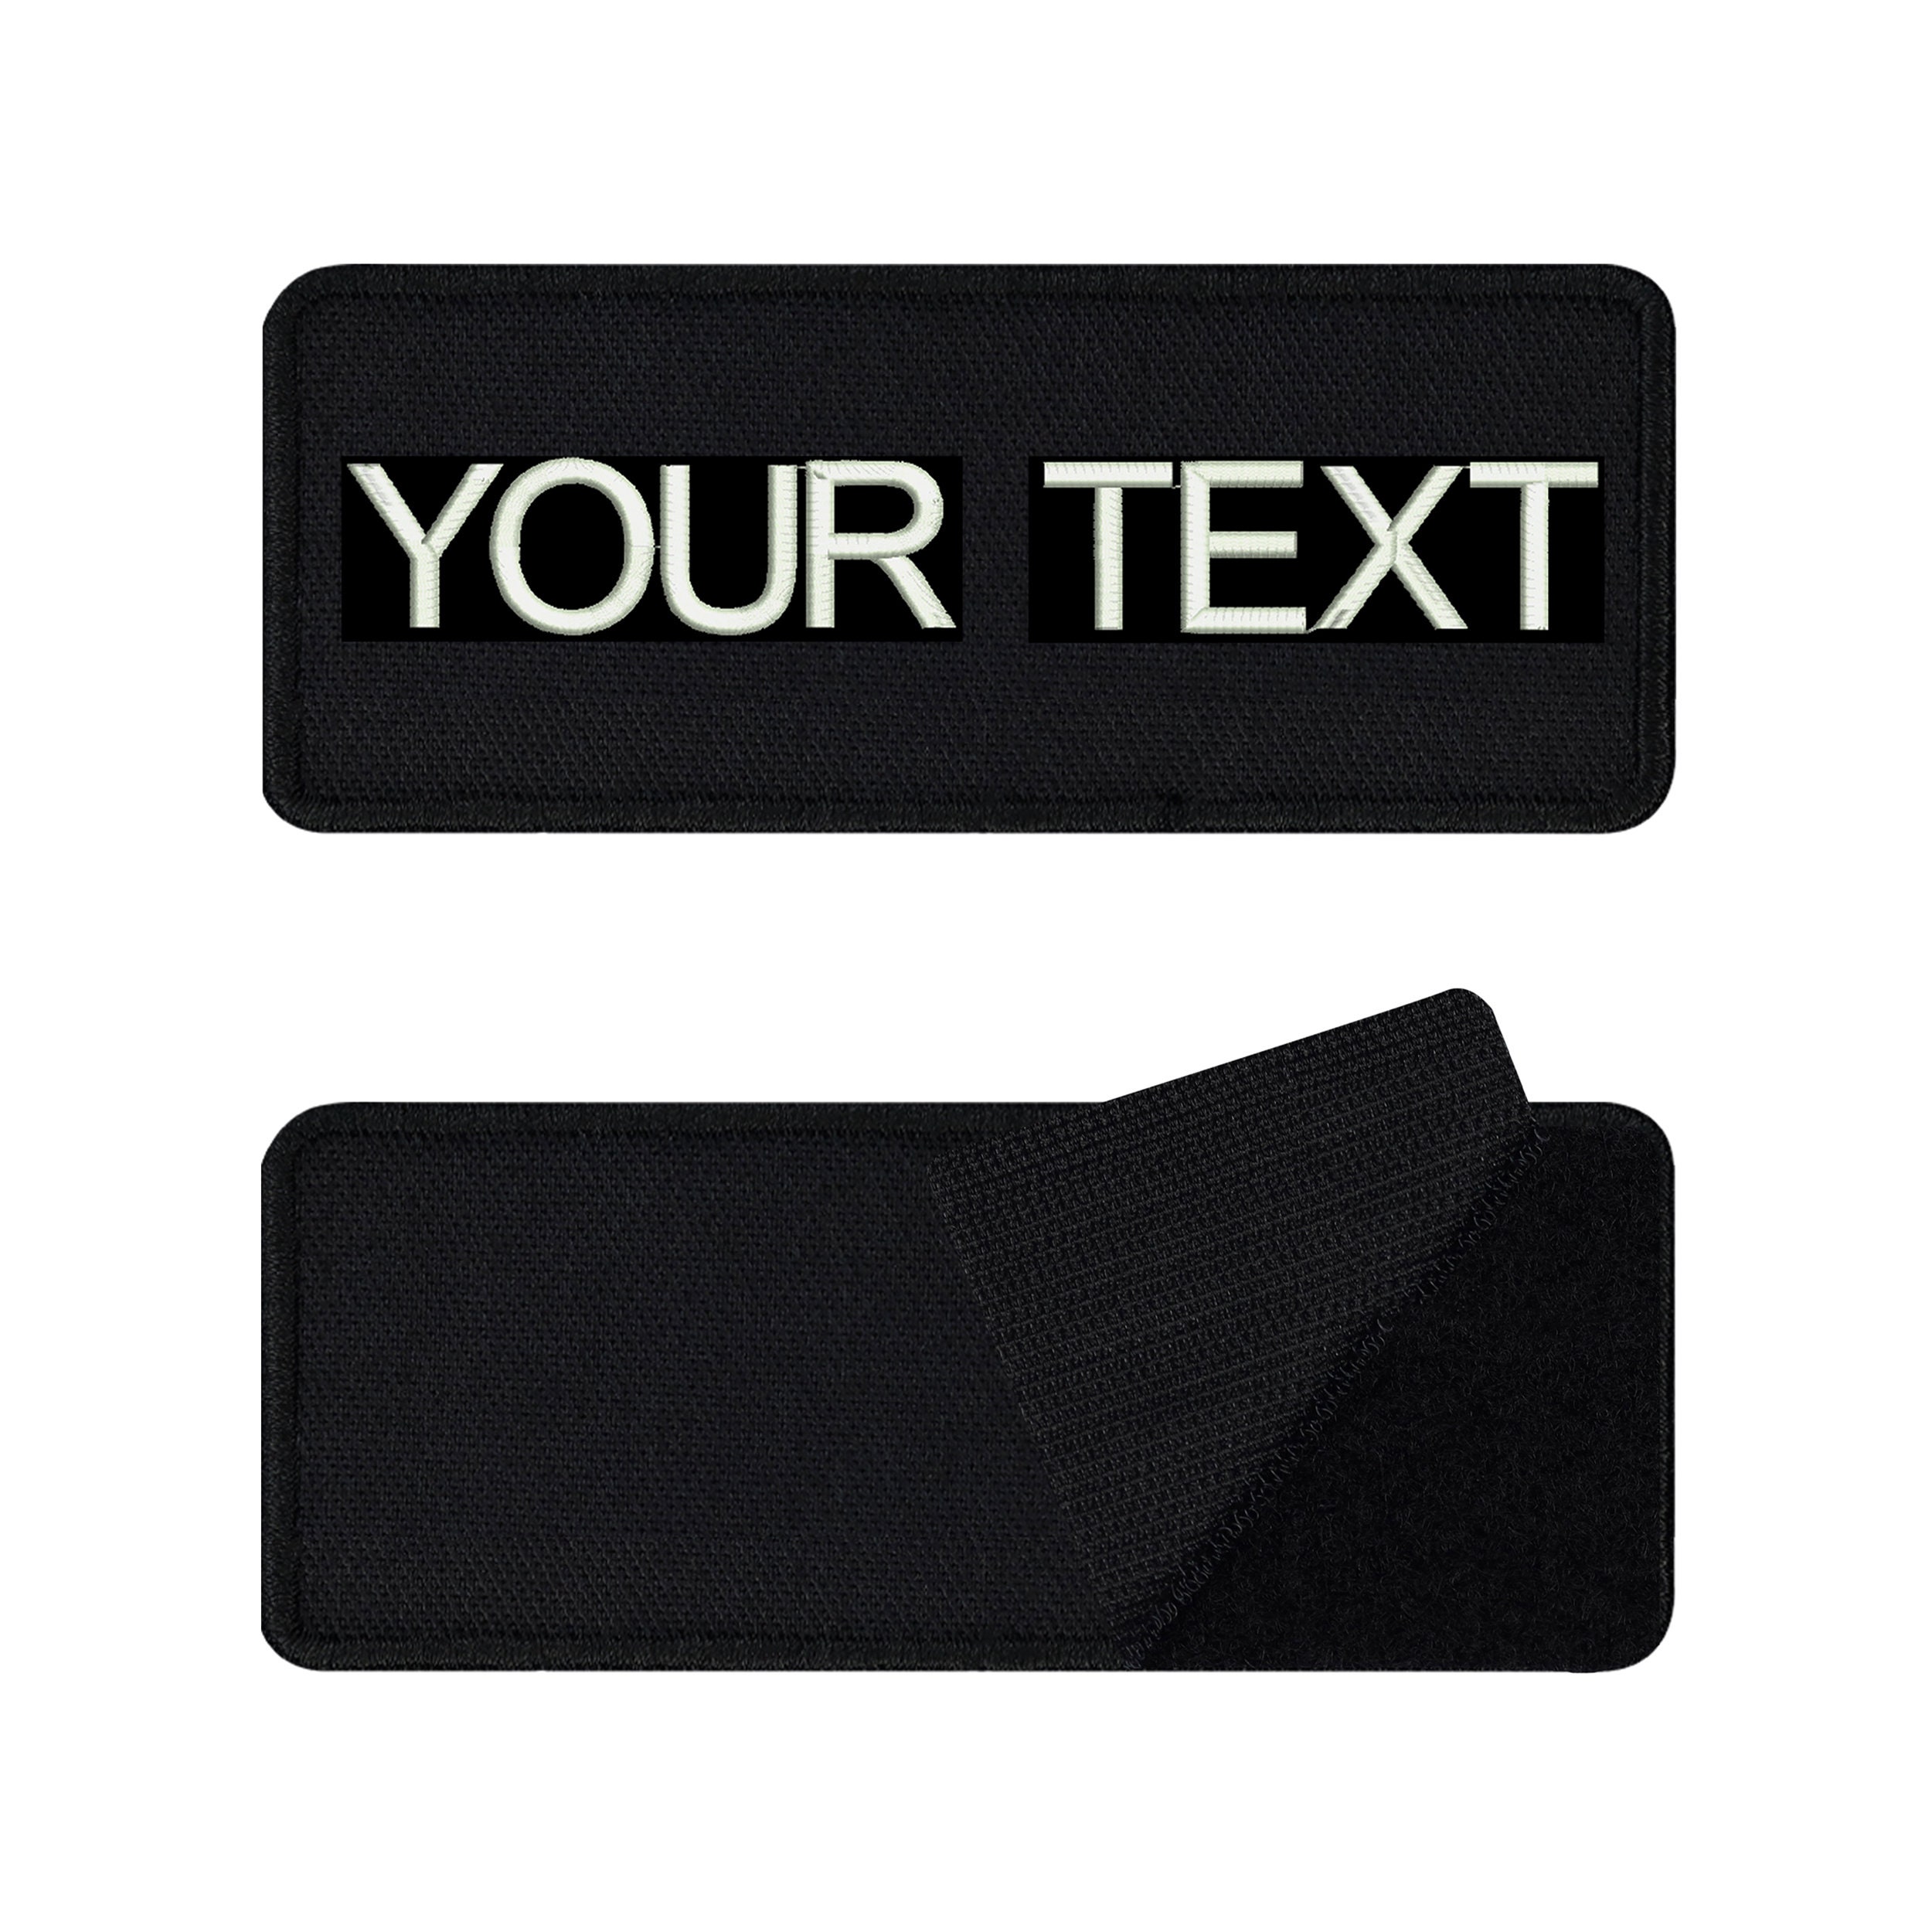 Velcro Patch Personalized With Velcro Name Tags Velkro 75 X 30 Mm